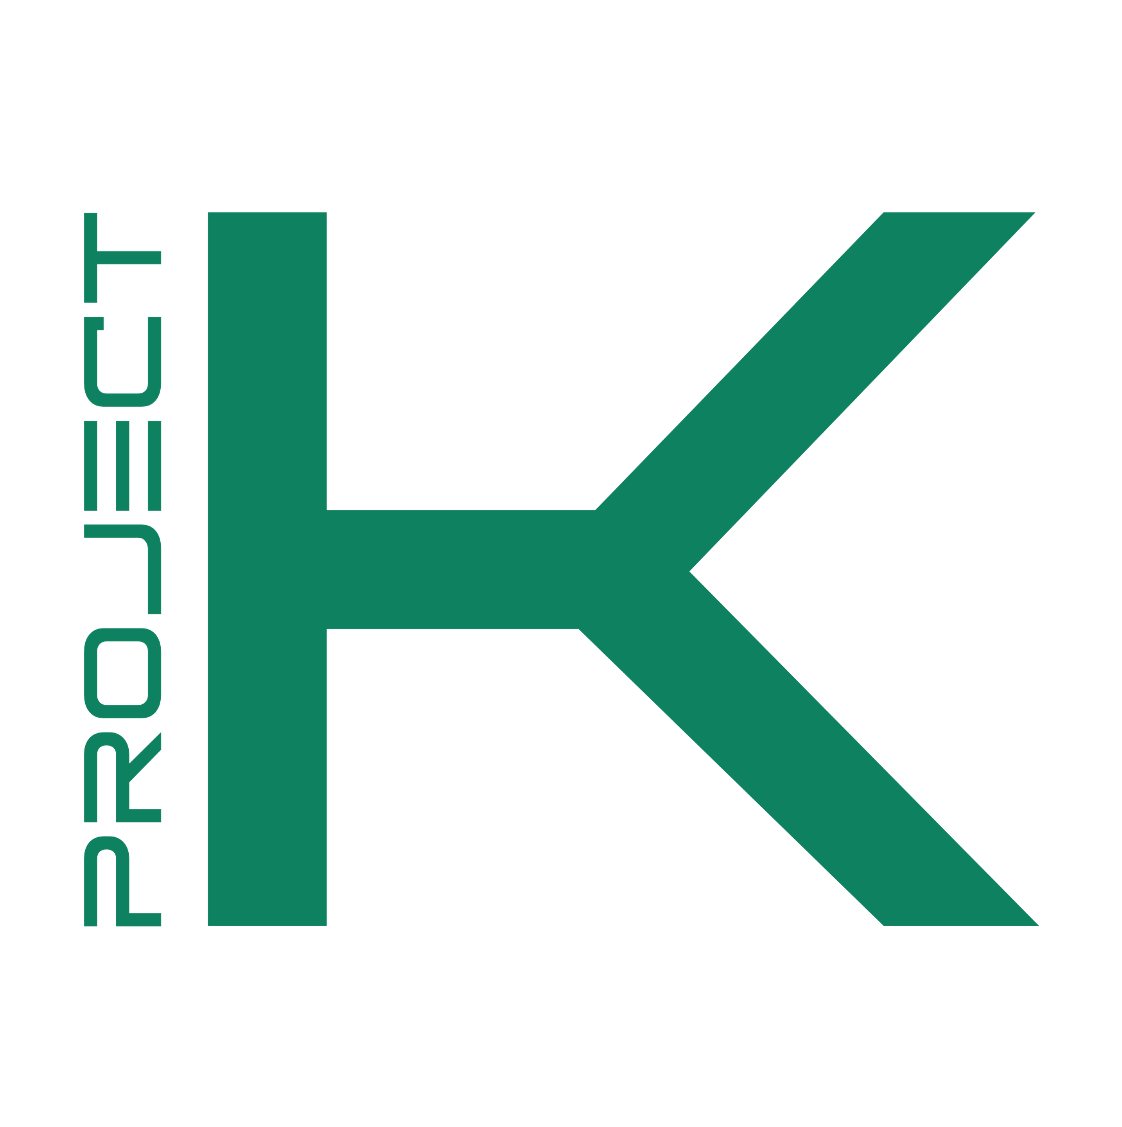 <a href="https://www.projectk.energy/">Project K</a> is an early-stage, clean-energy, hard-tech startup developing and commercializing potassium-ion batteries for faster-charging, more sustainable, and more affordable EVs and grid-scale energy storage.